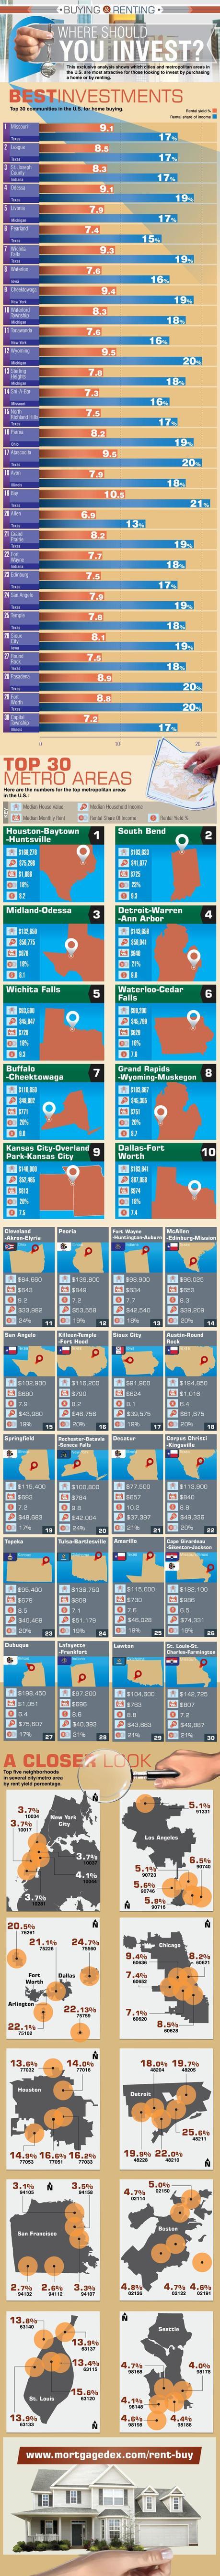 Top Cities For Residential Investing Infographic